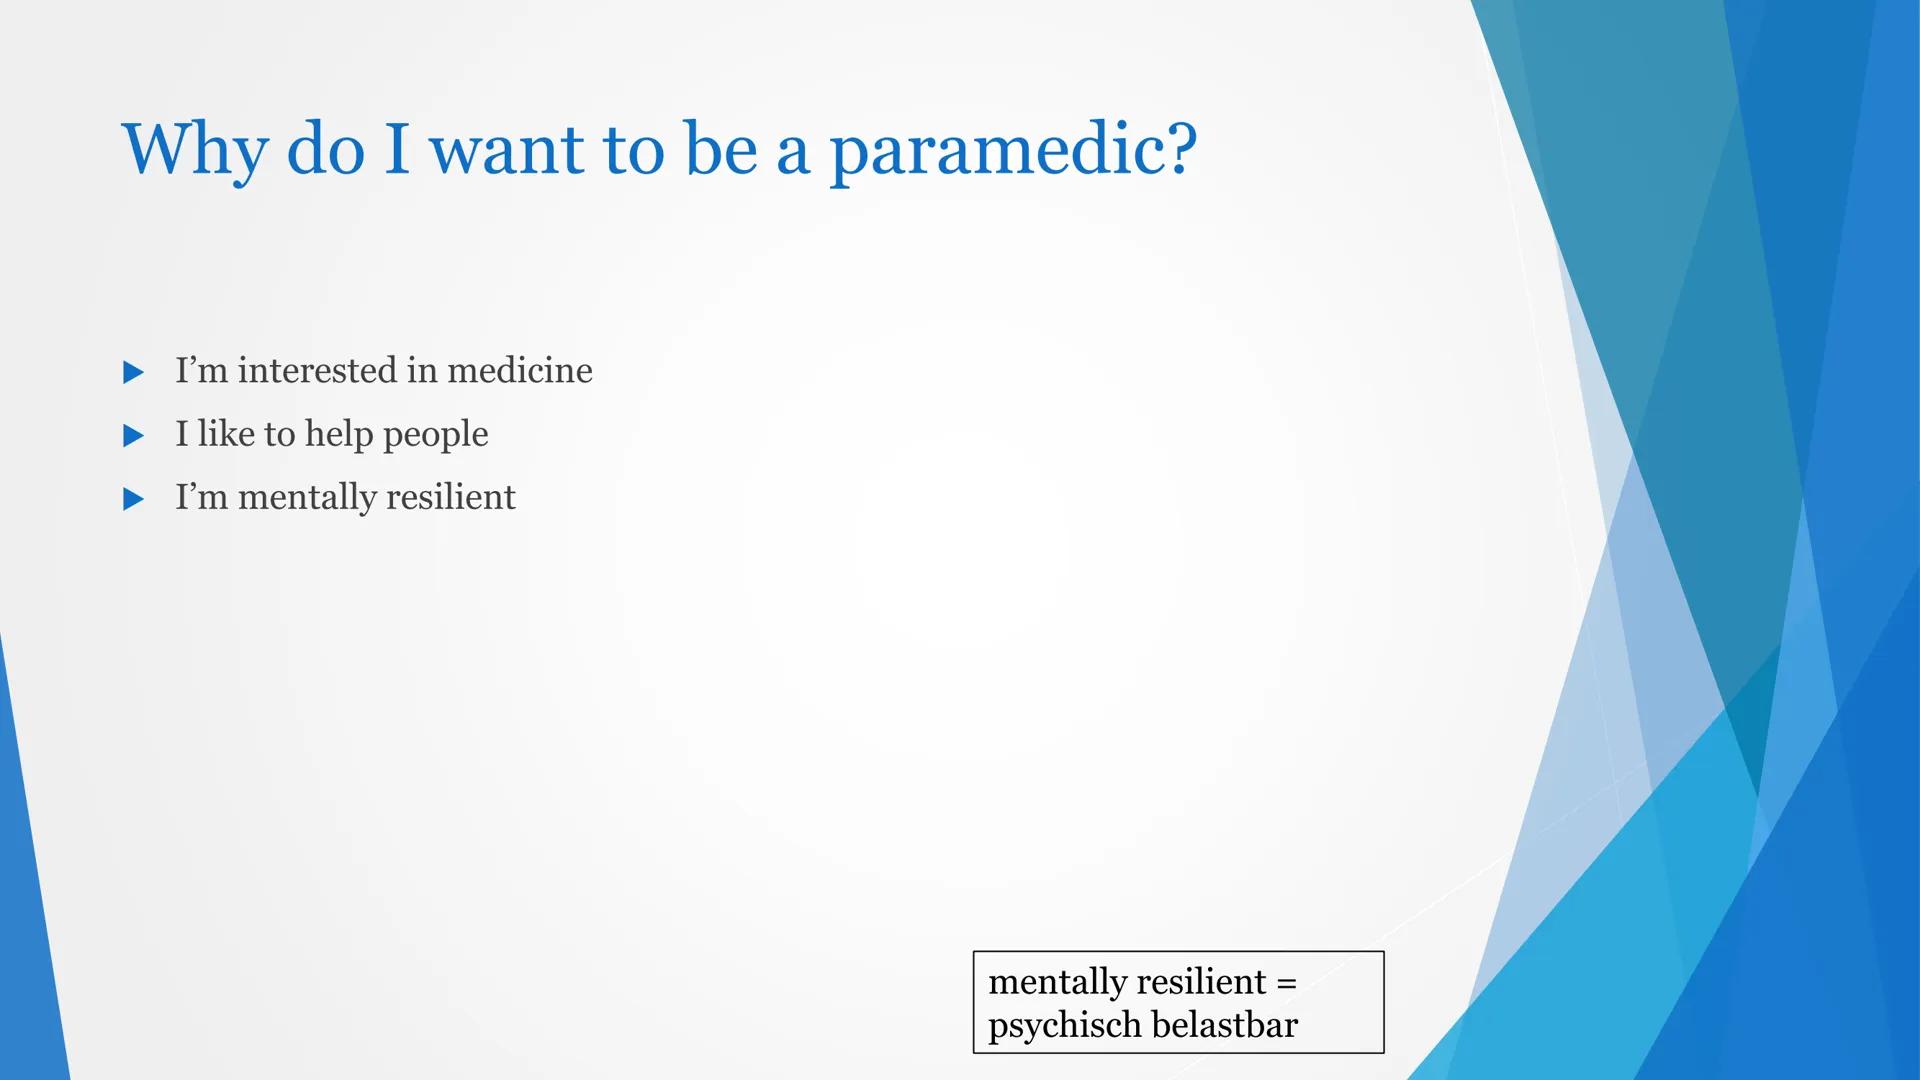 Paramedic Content
► Why do I want to be a paramedic?
Requirements
Education
Tasks
Workwear
► Workplaces
Working hours and the wage
Daily rou